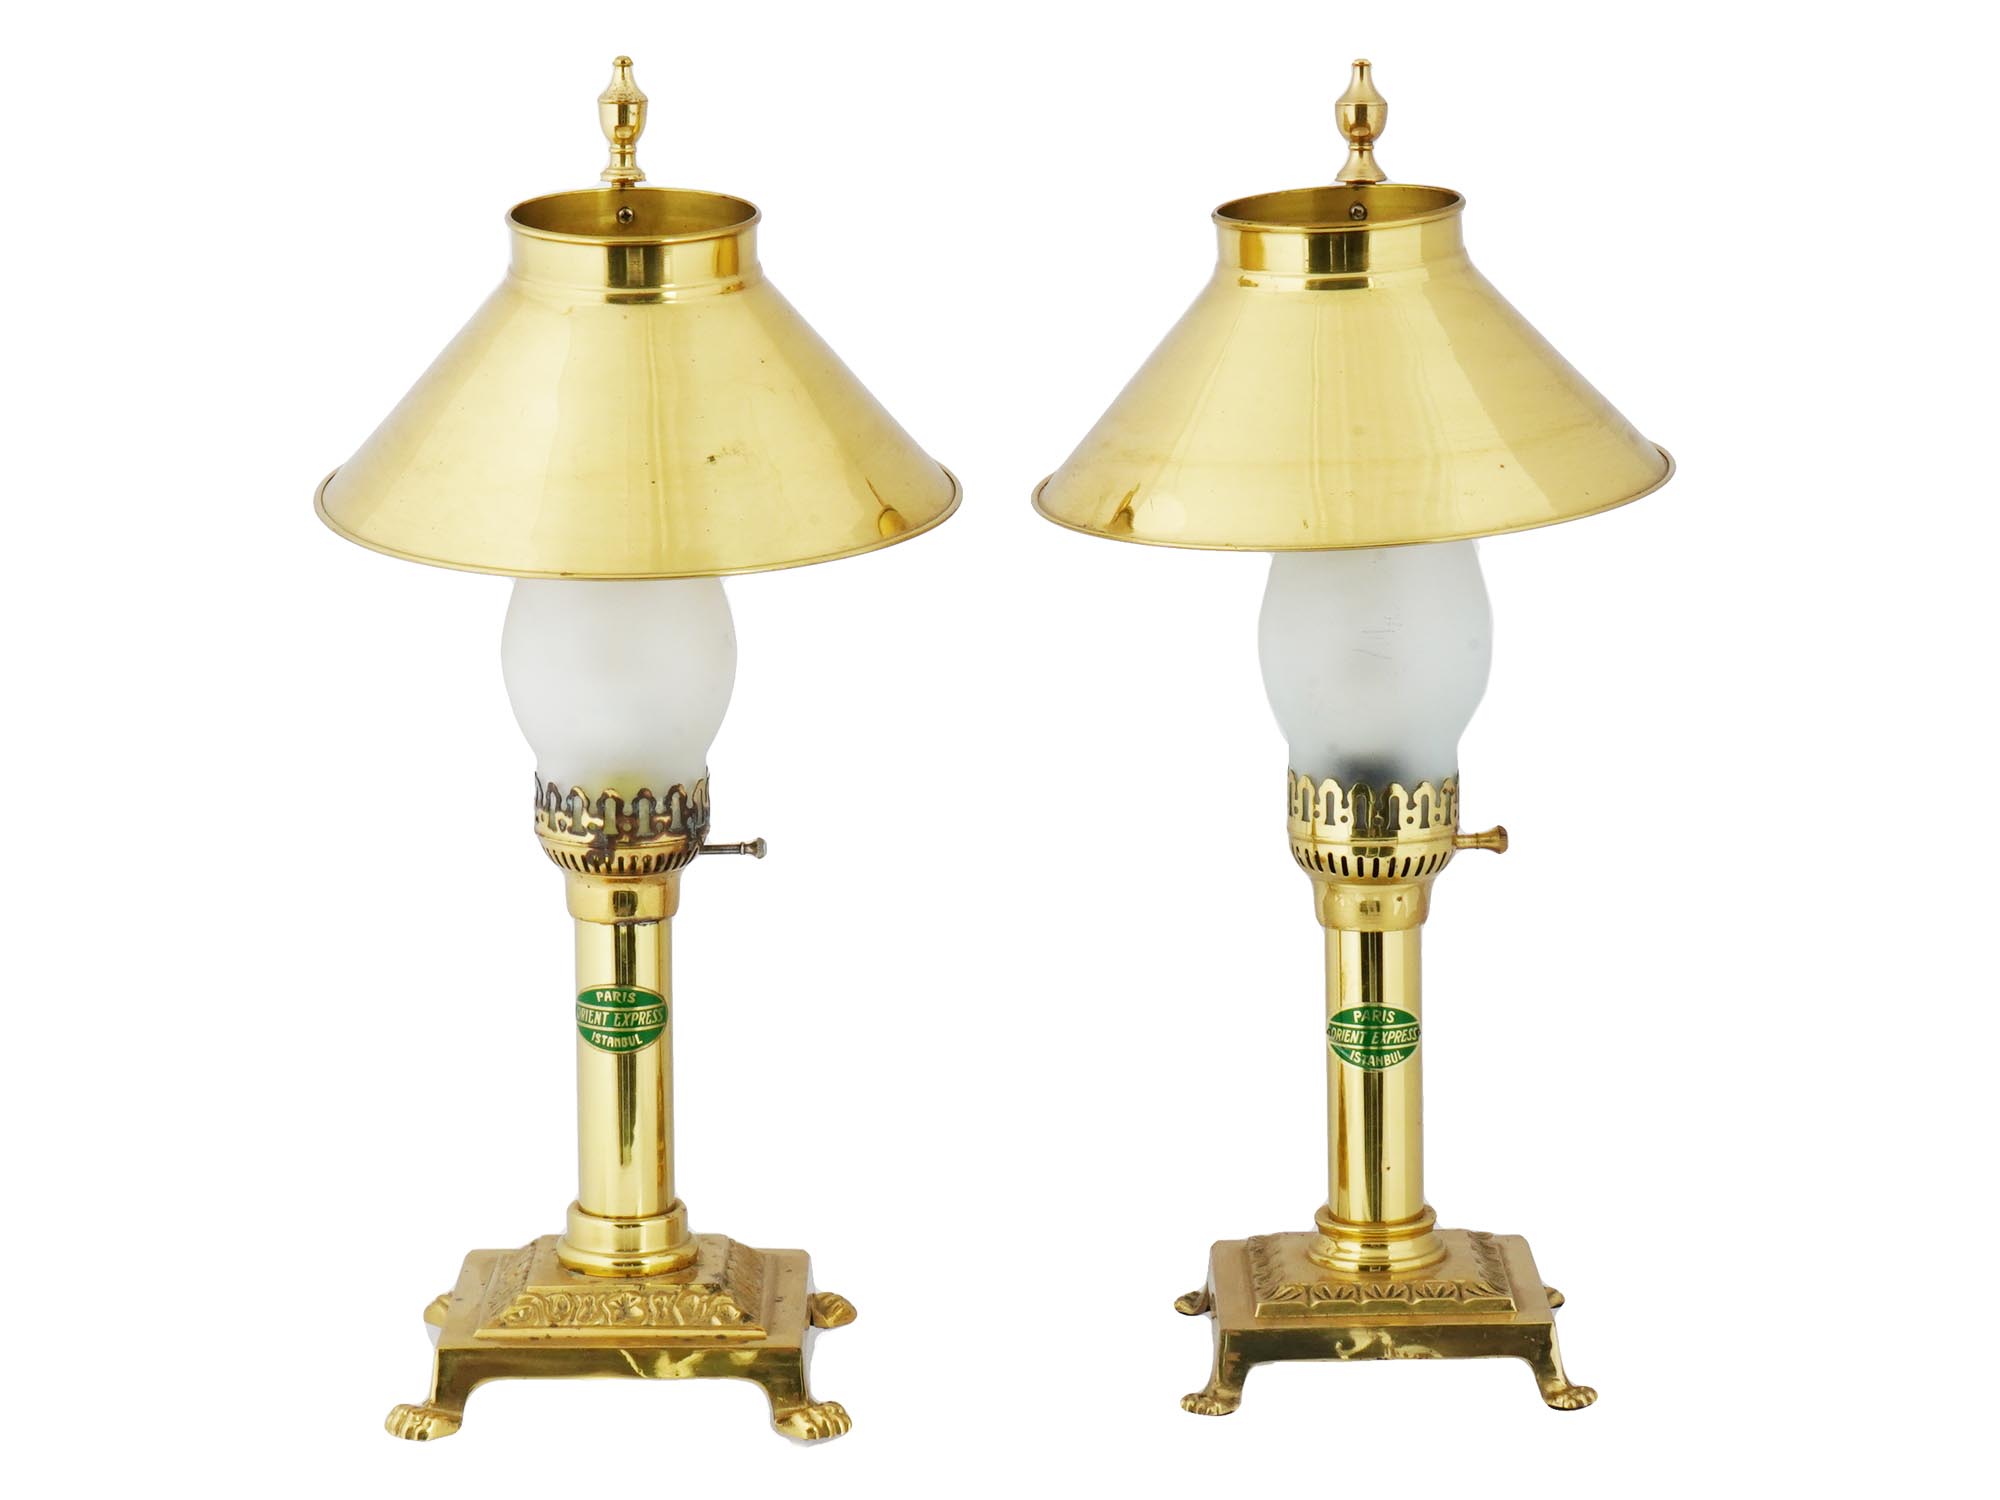 VINTAGE GILT BRASS ORIENT EXPRESS TABLE LAMPS PIC-0